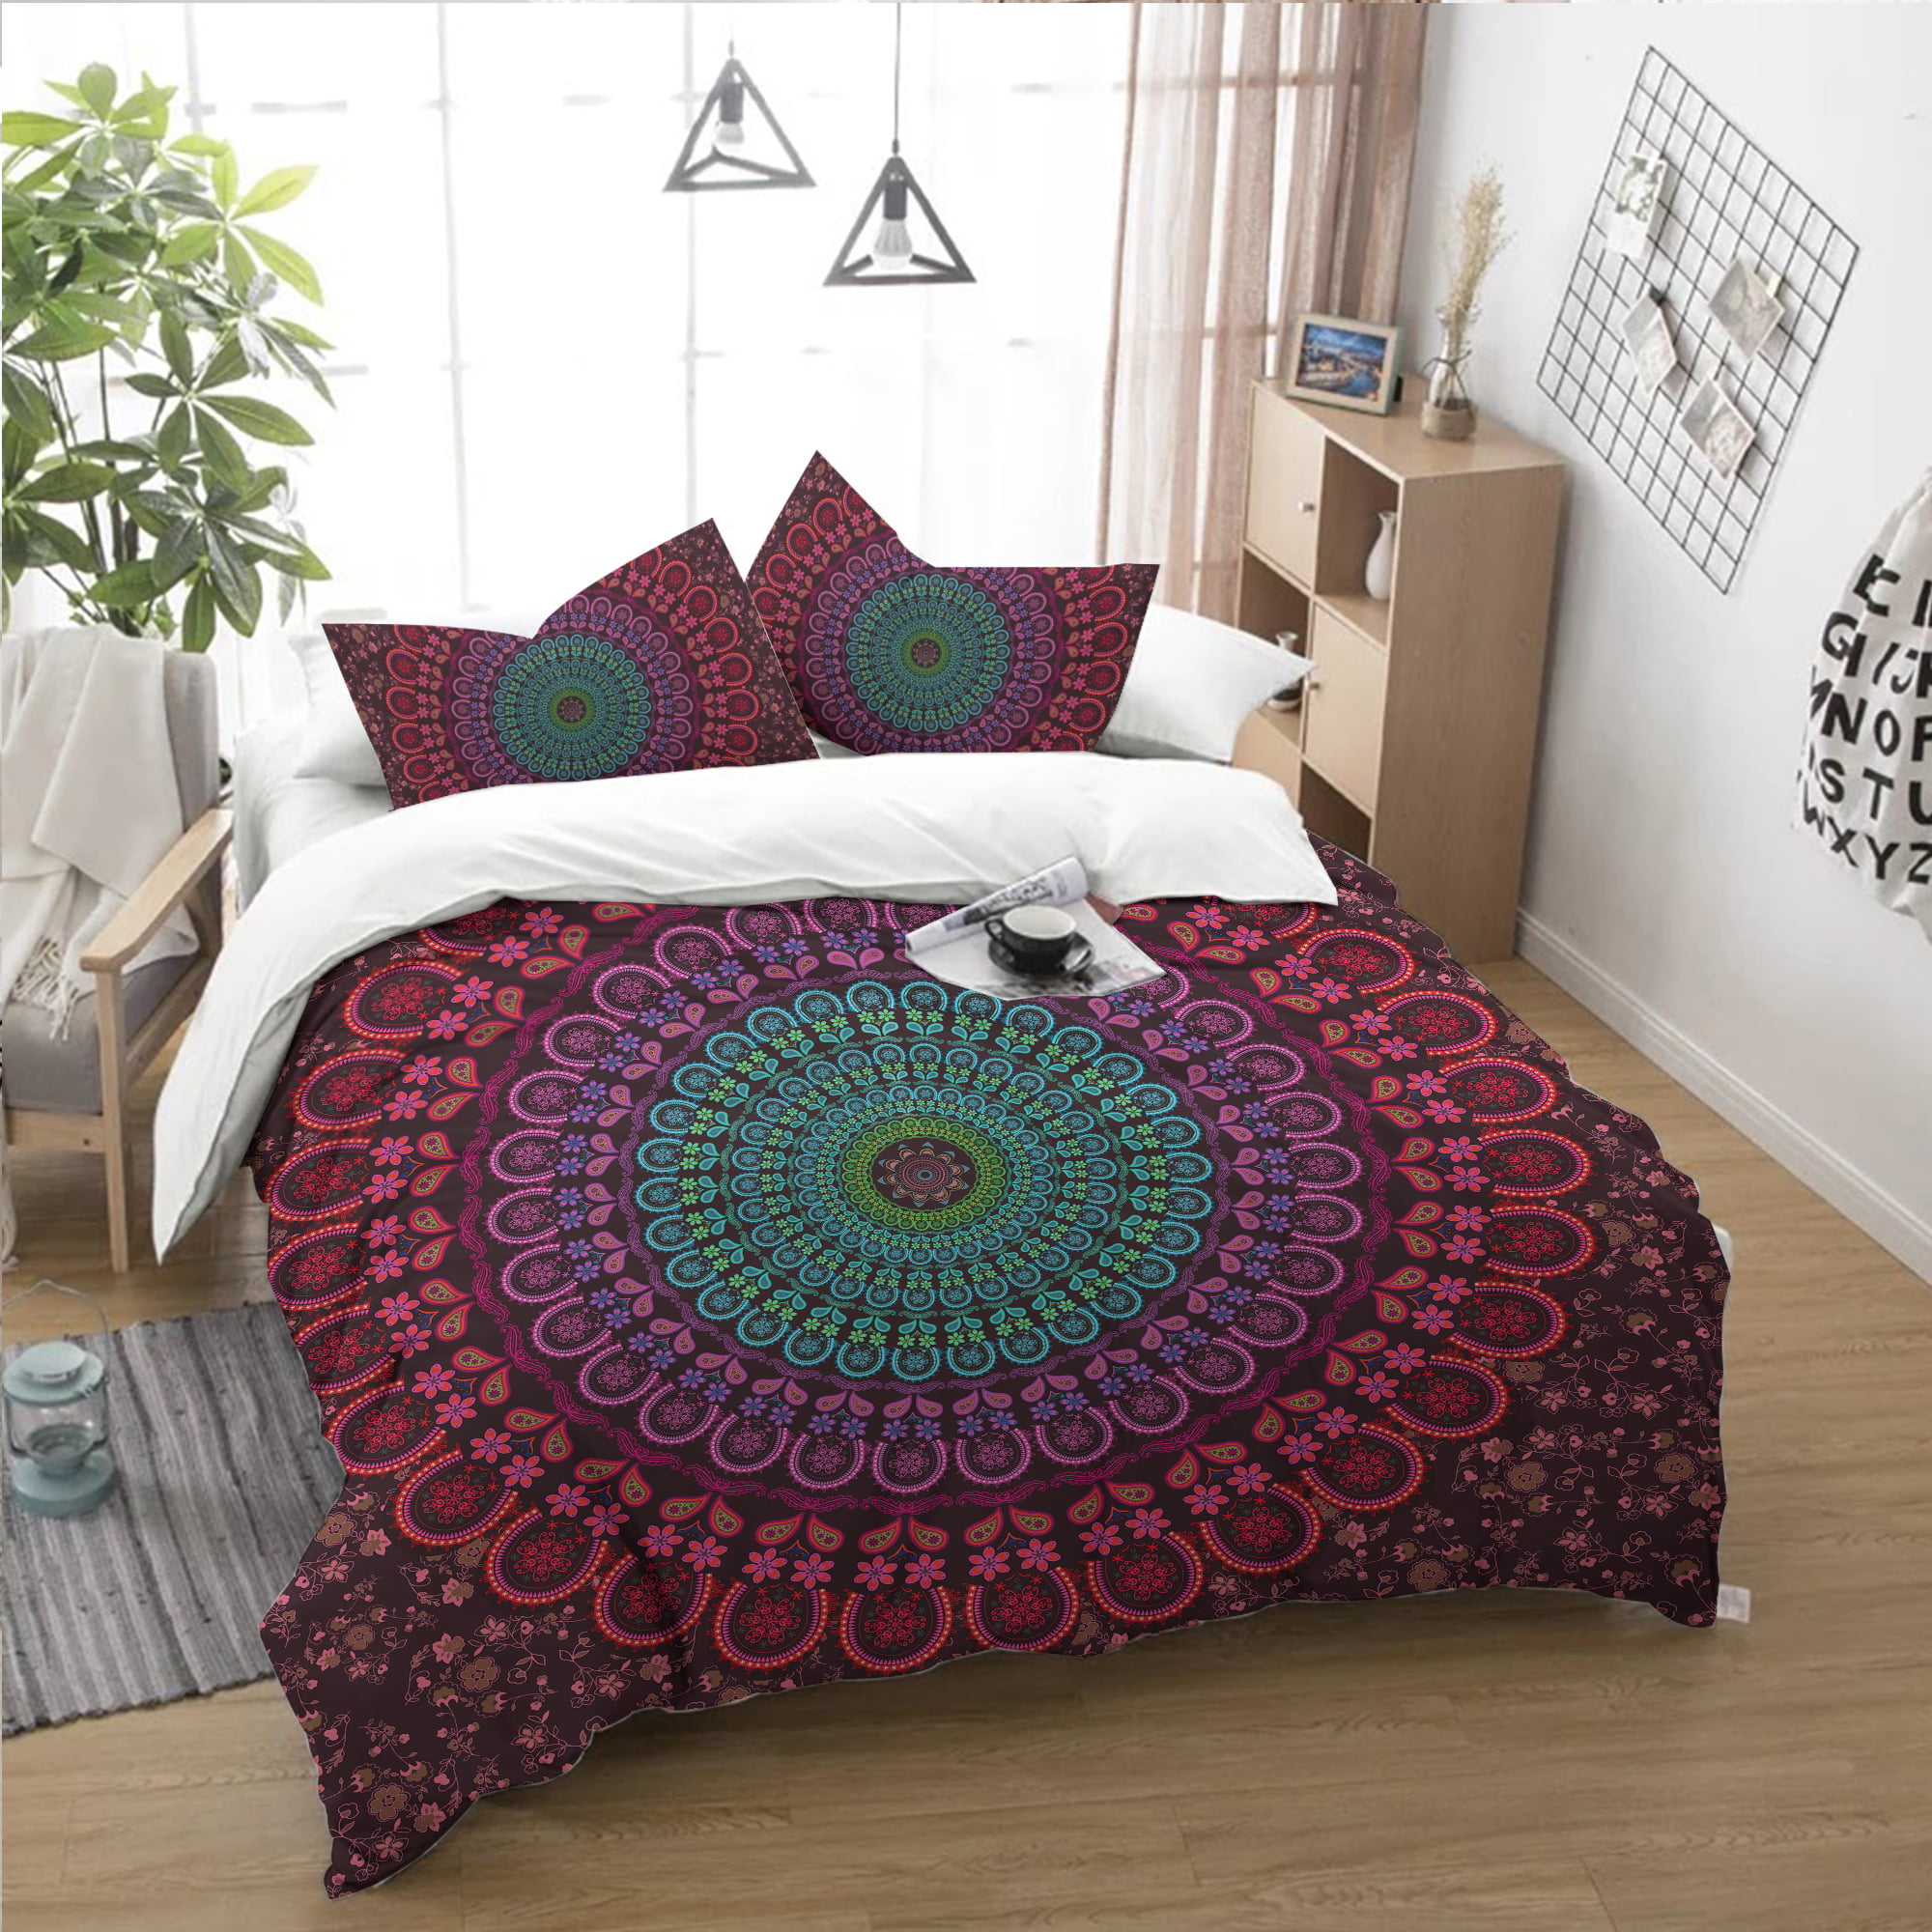 Soft Bedding Hippie bedding Personalized Bed Set Hippie Mandala Bedding Set Twin Queen King Bedding set printed quilt